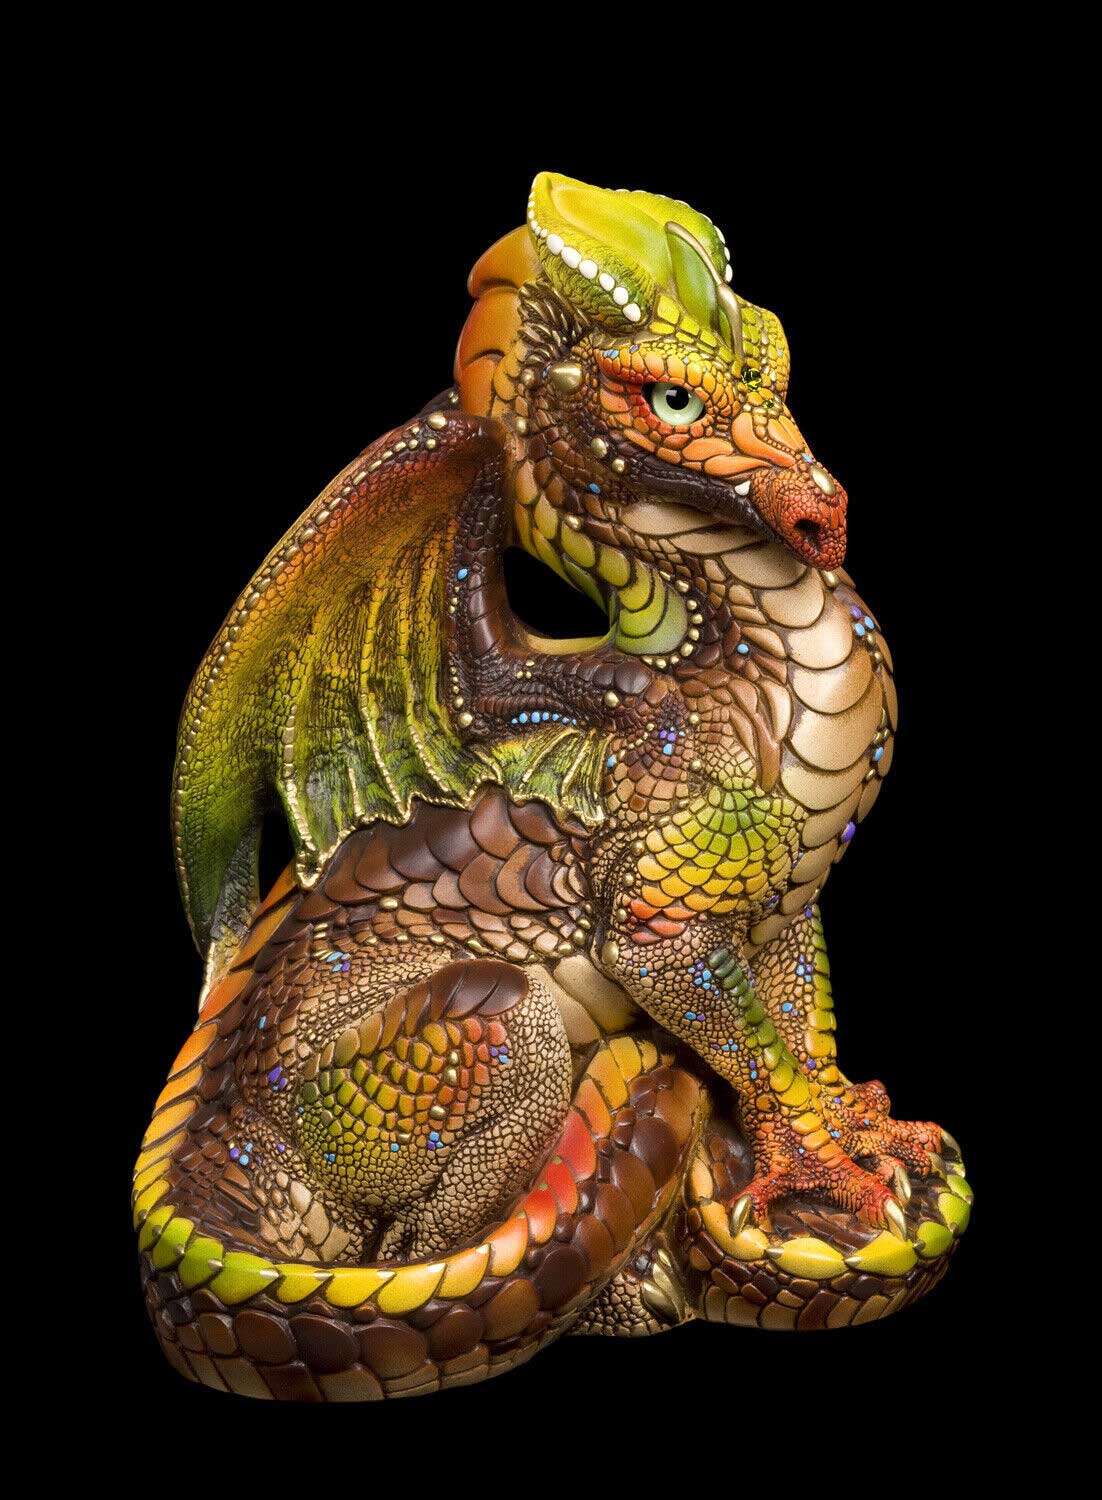 20221121-Autumn-Harvest-Male-Dragon-Test-Paint-1-by-Gina